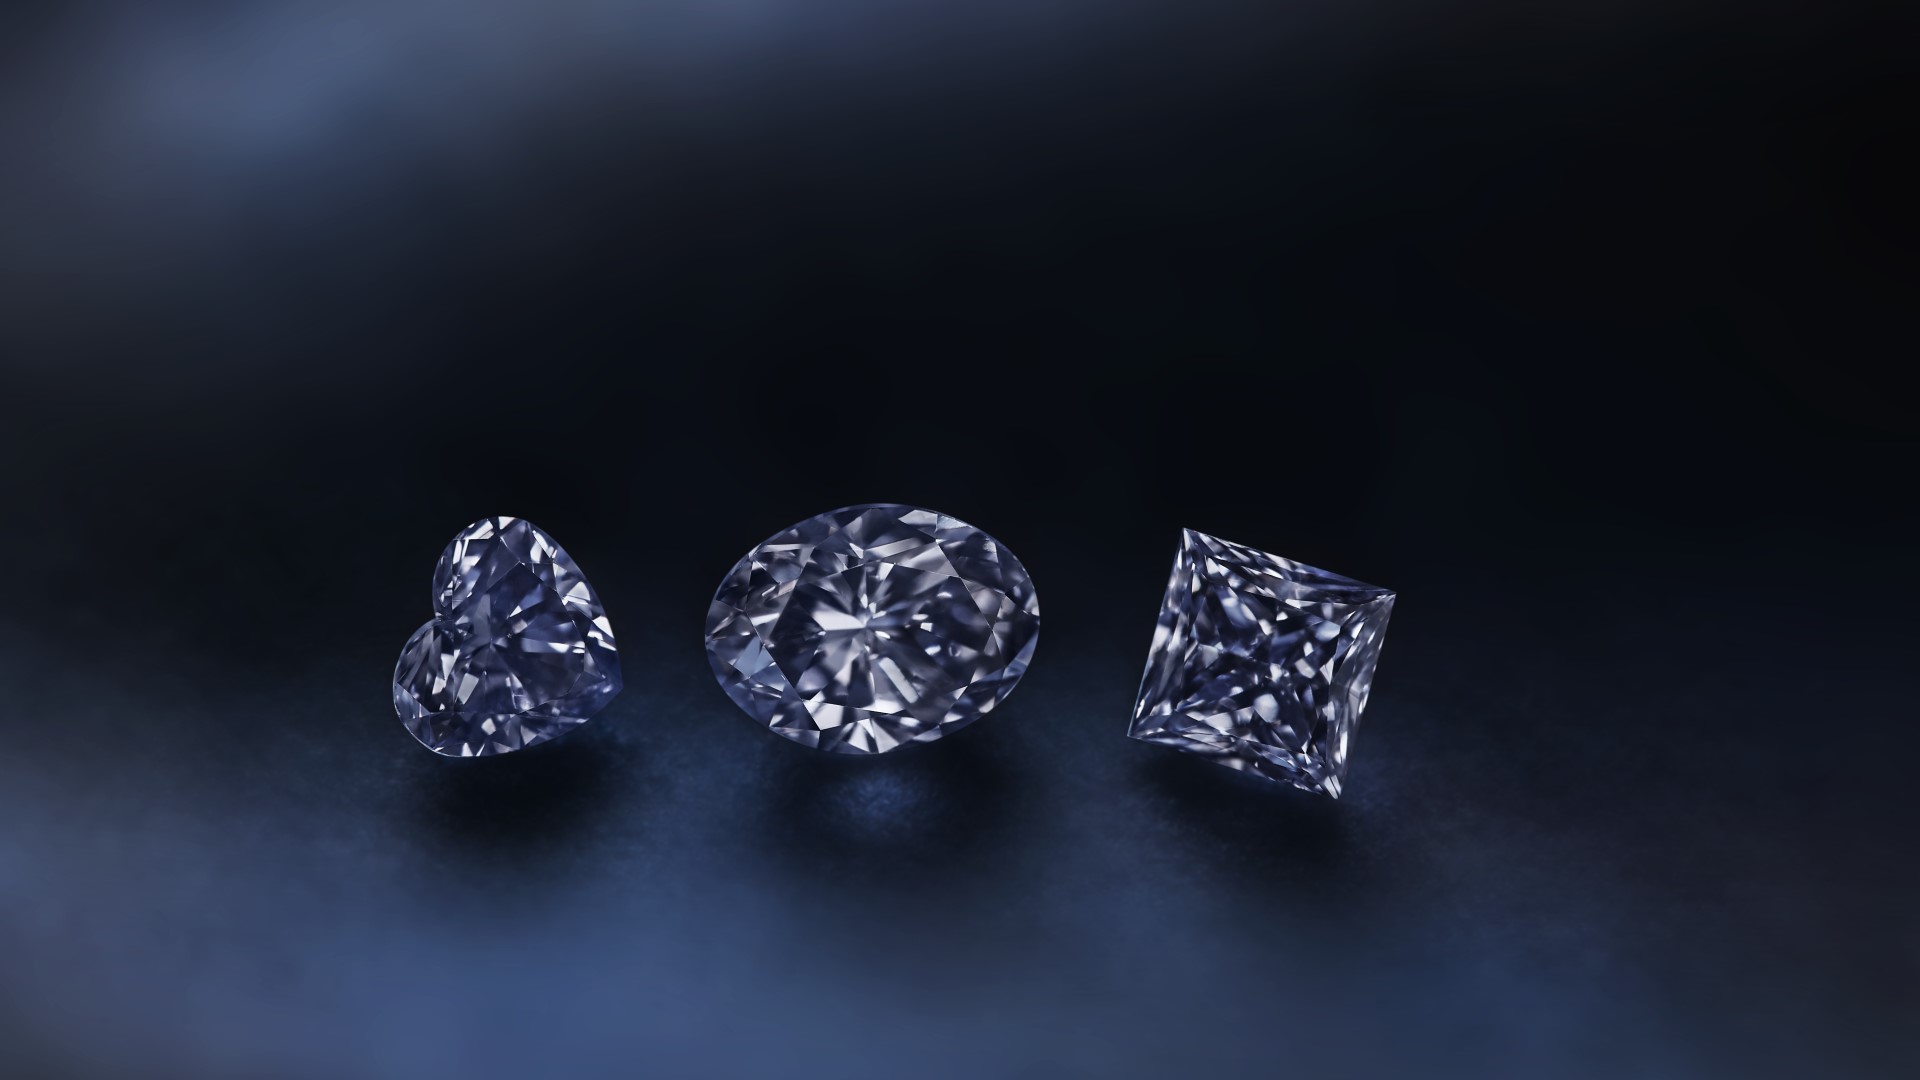 Diamonds from the 2020 APD Tender